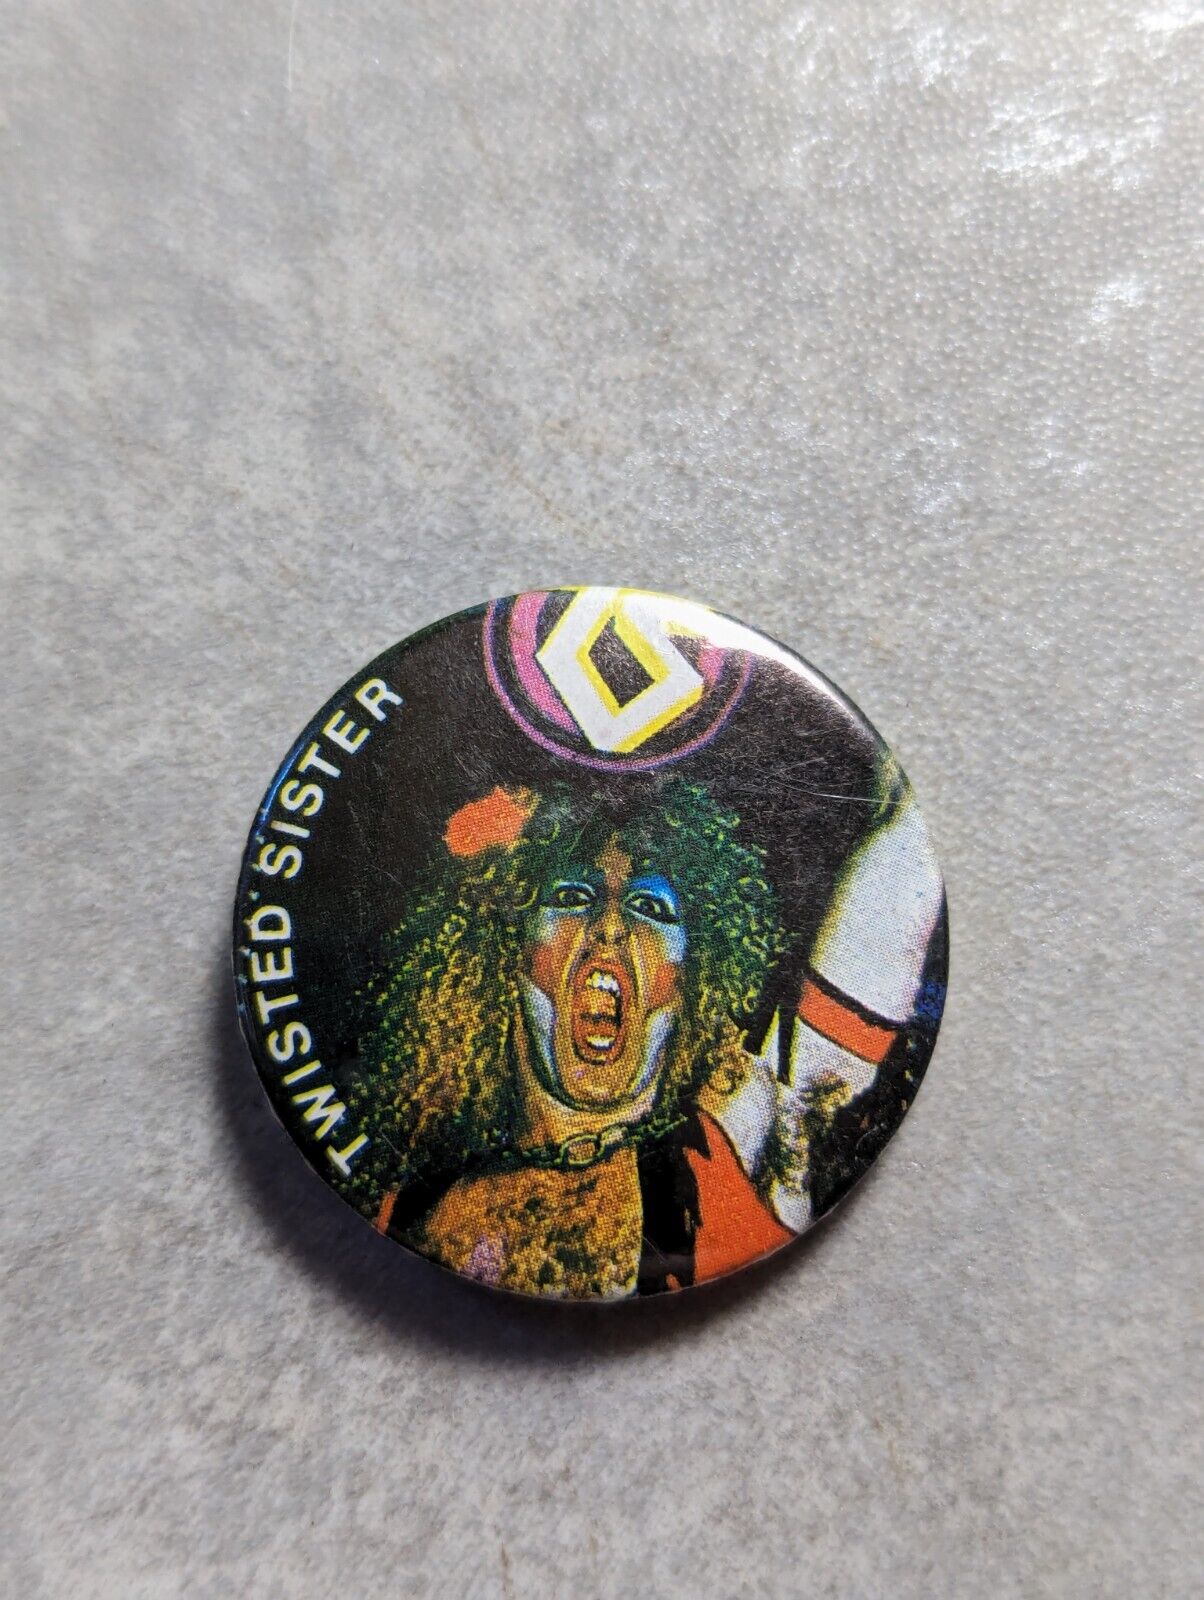 Vintage 80s Twisted Sister PIN BADGE Purchased Around 1986